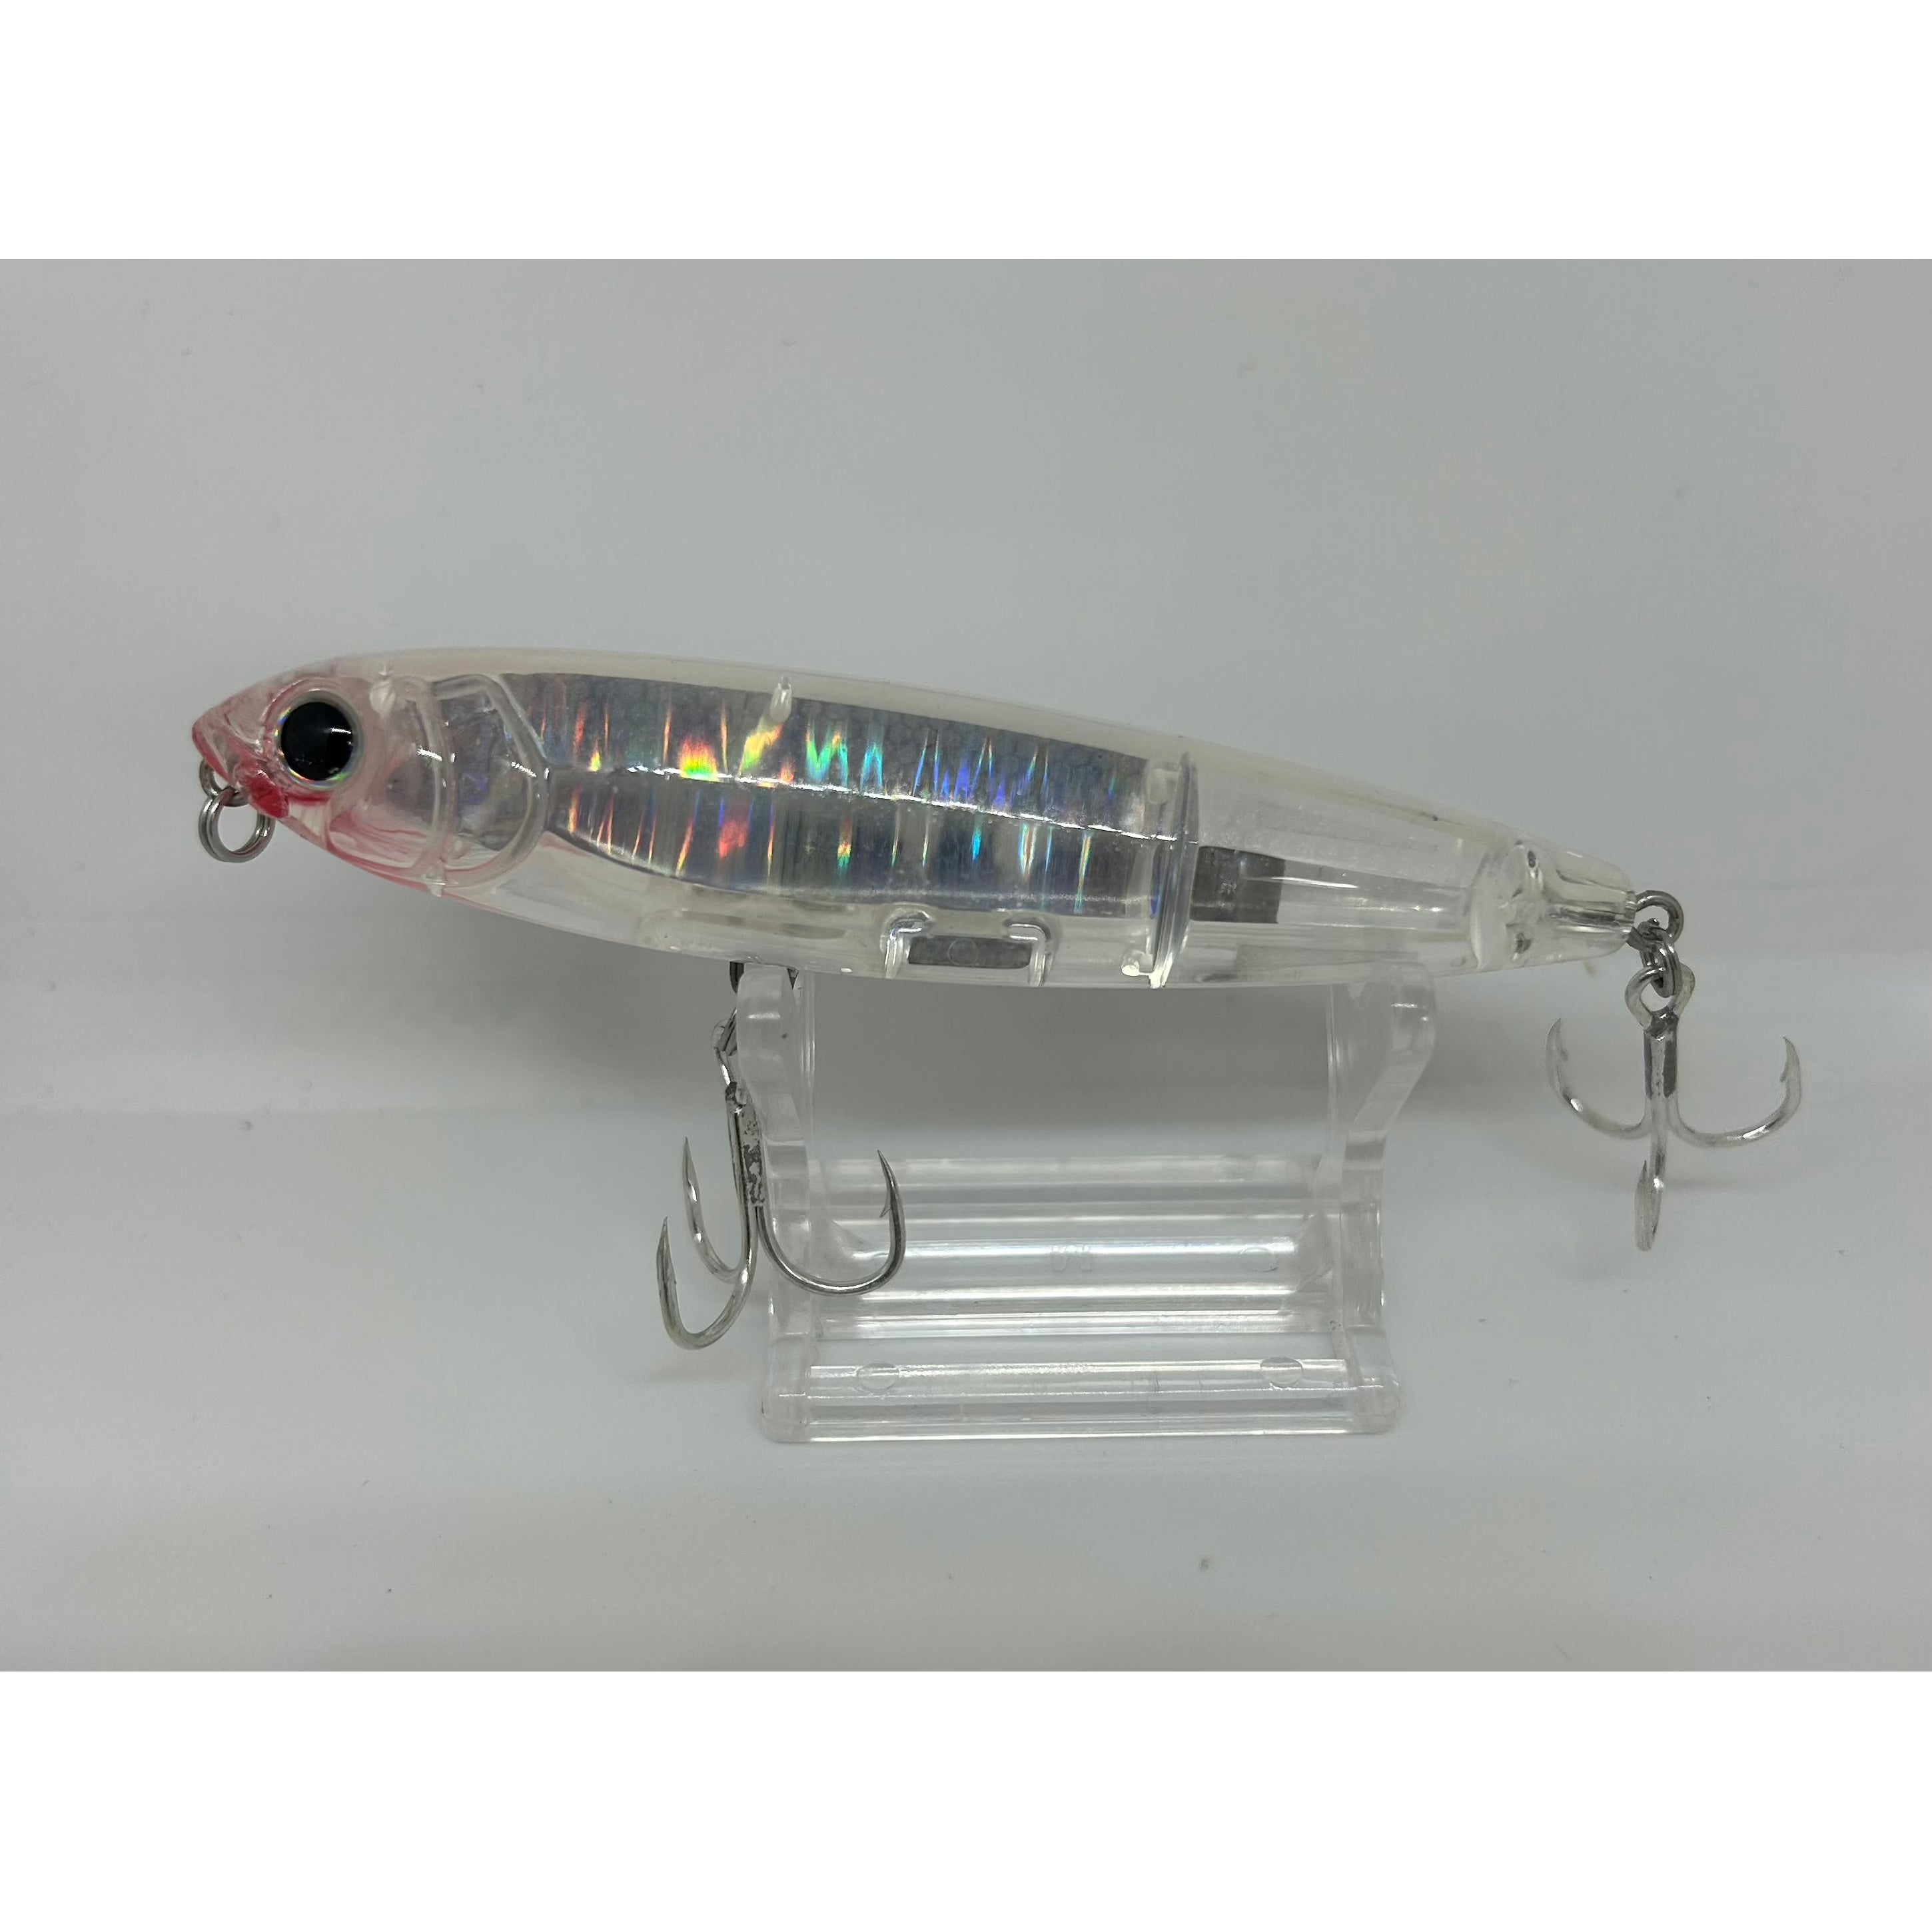 Small Surface 3D Inshore Prism Pencil Bass Lures 100mm 17g